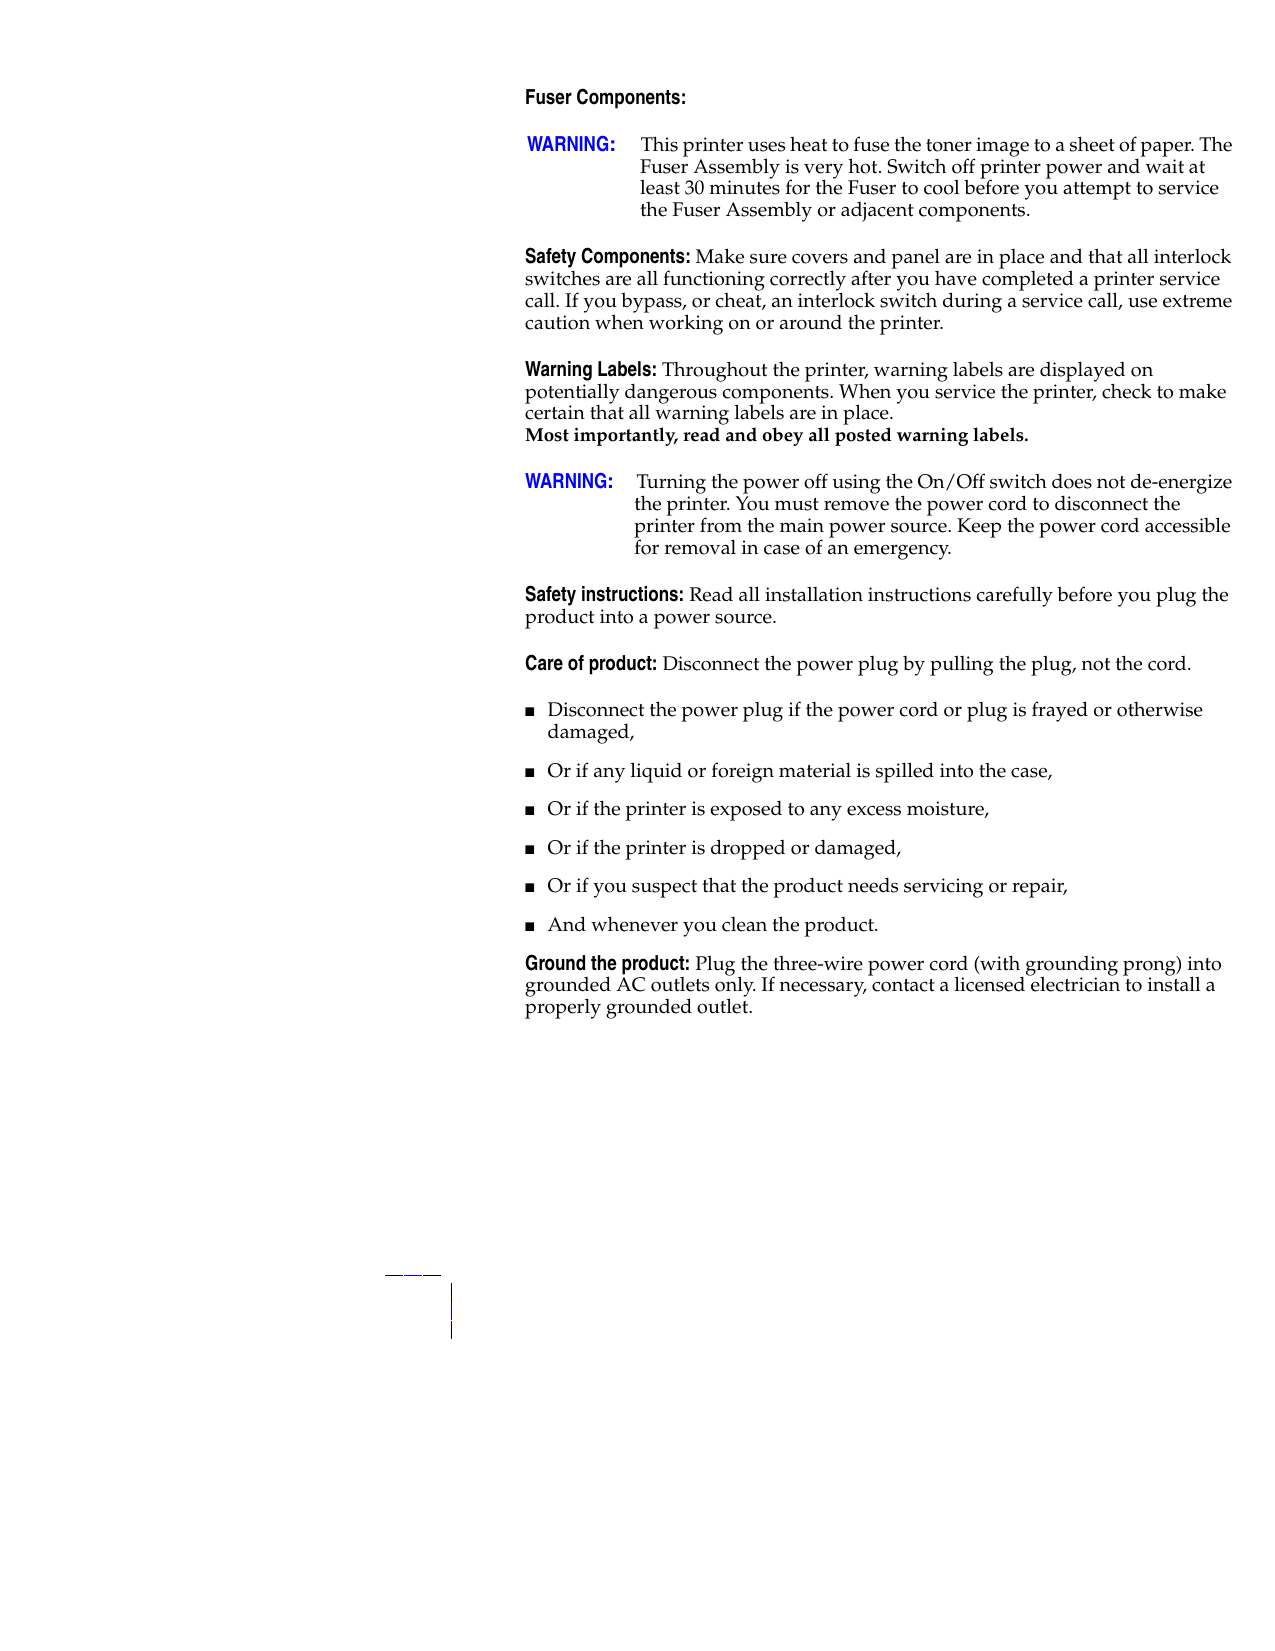 Xerox Phaser 7700 color laser printer service guide Preview image 4